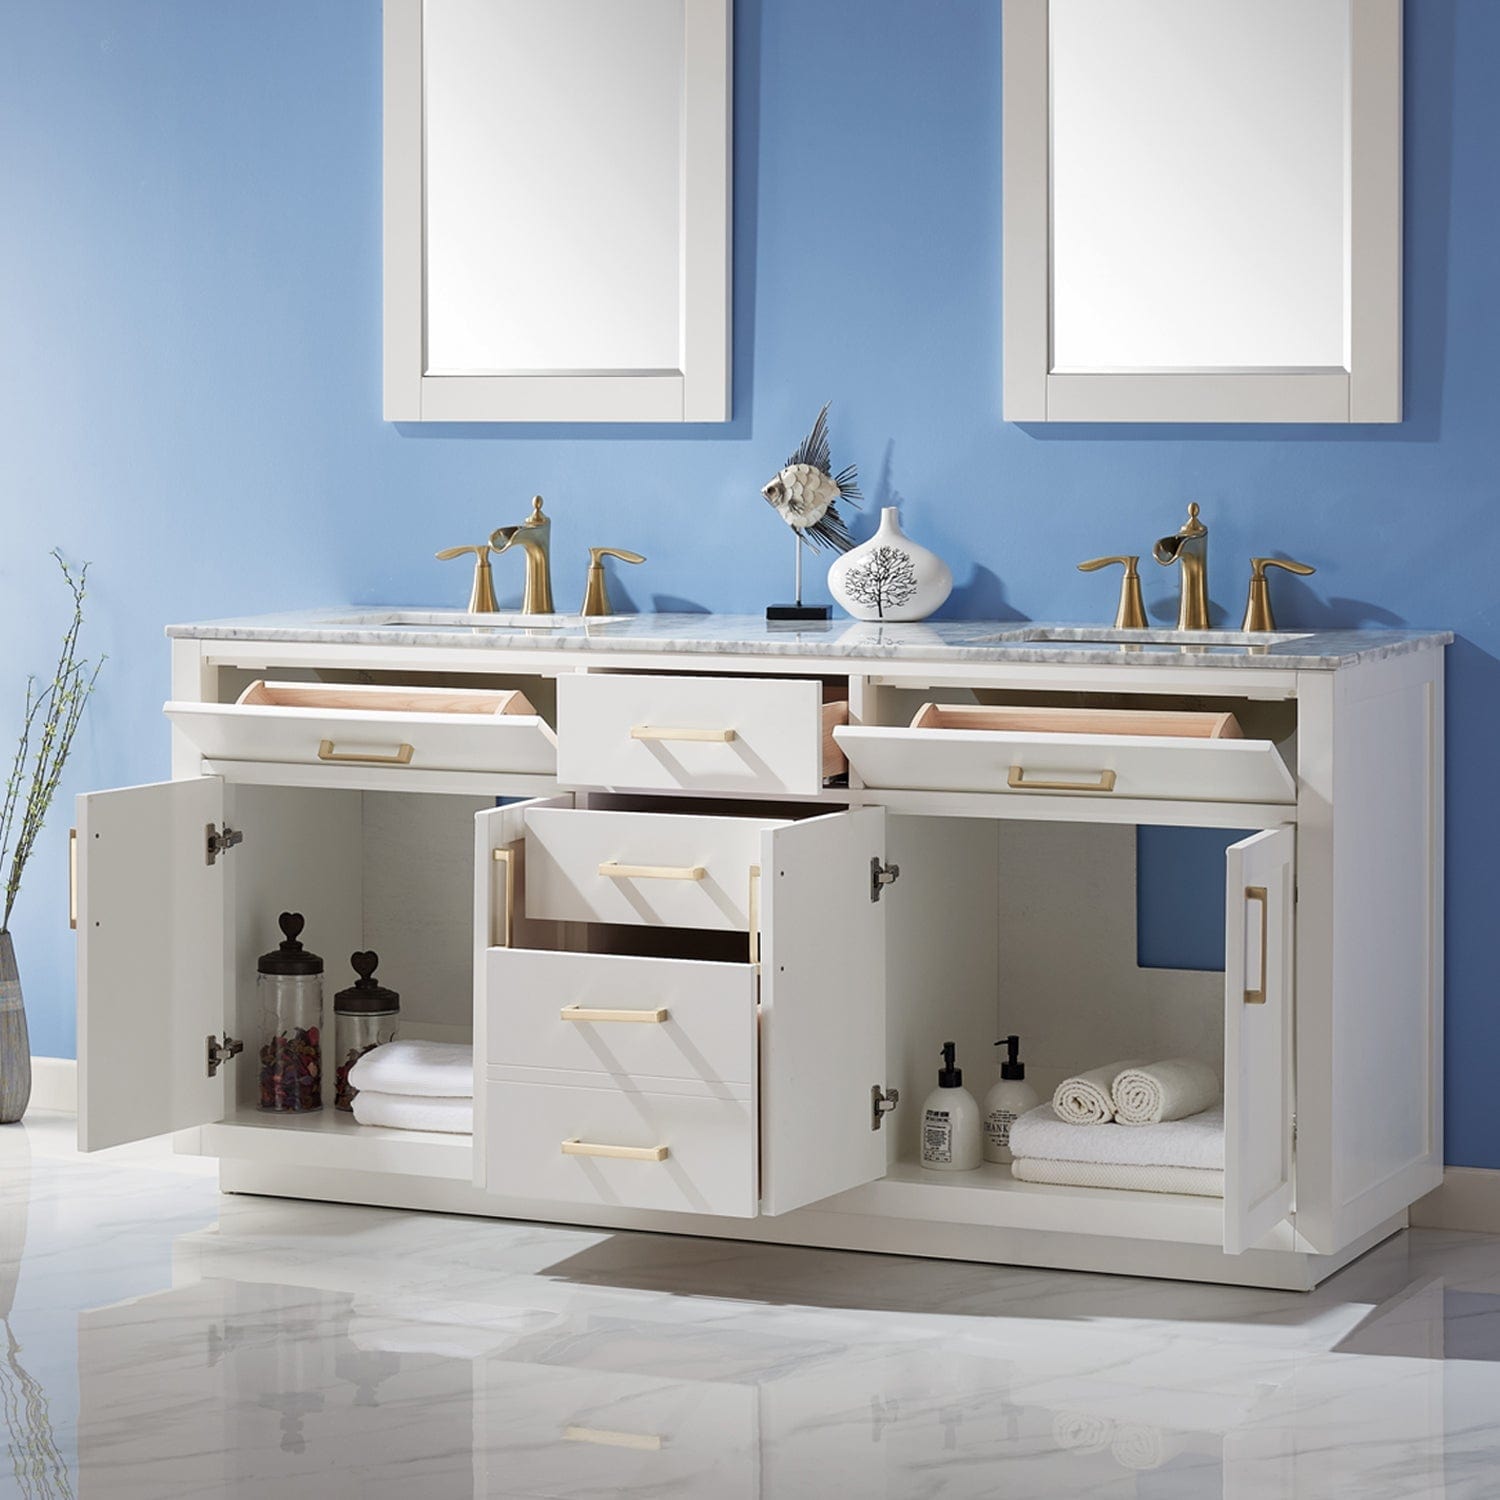 Altair Ivy 72" Double Bathroom Vanity Set in White and Carrara White Marble Countertop with Mirror 531072-WH-CA - Molaix631112971317Vanity531072-WH-CA